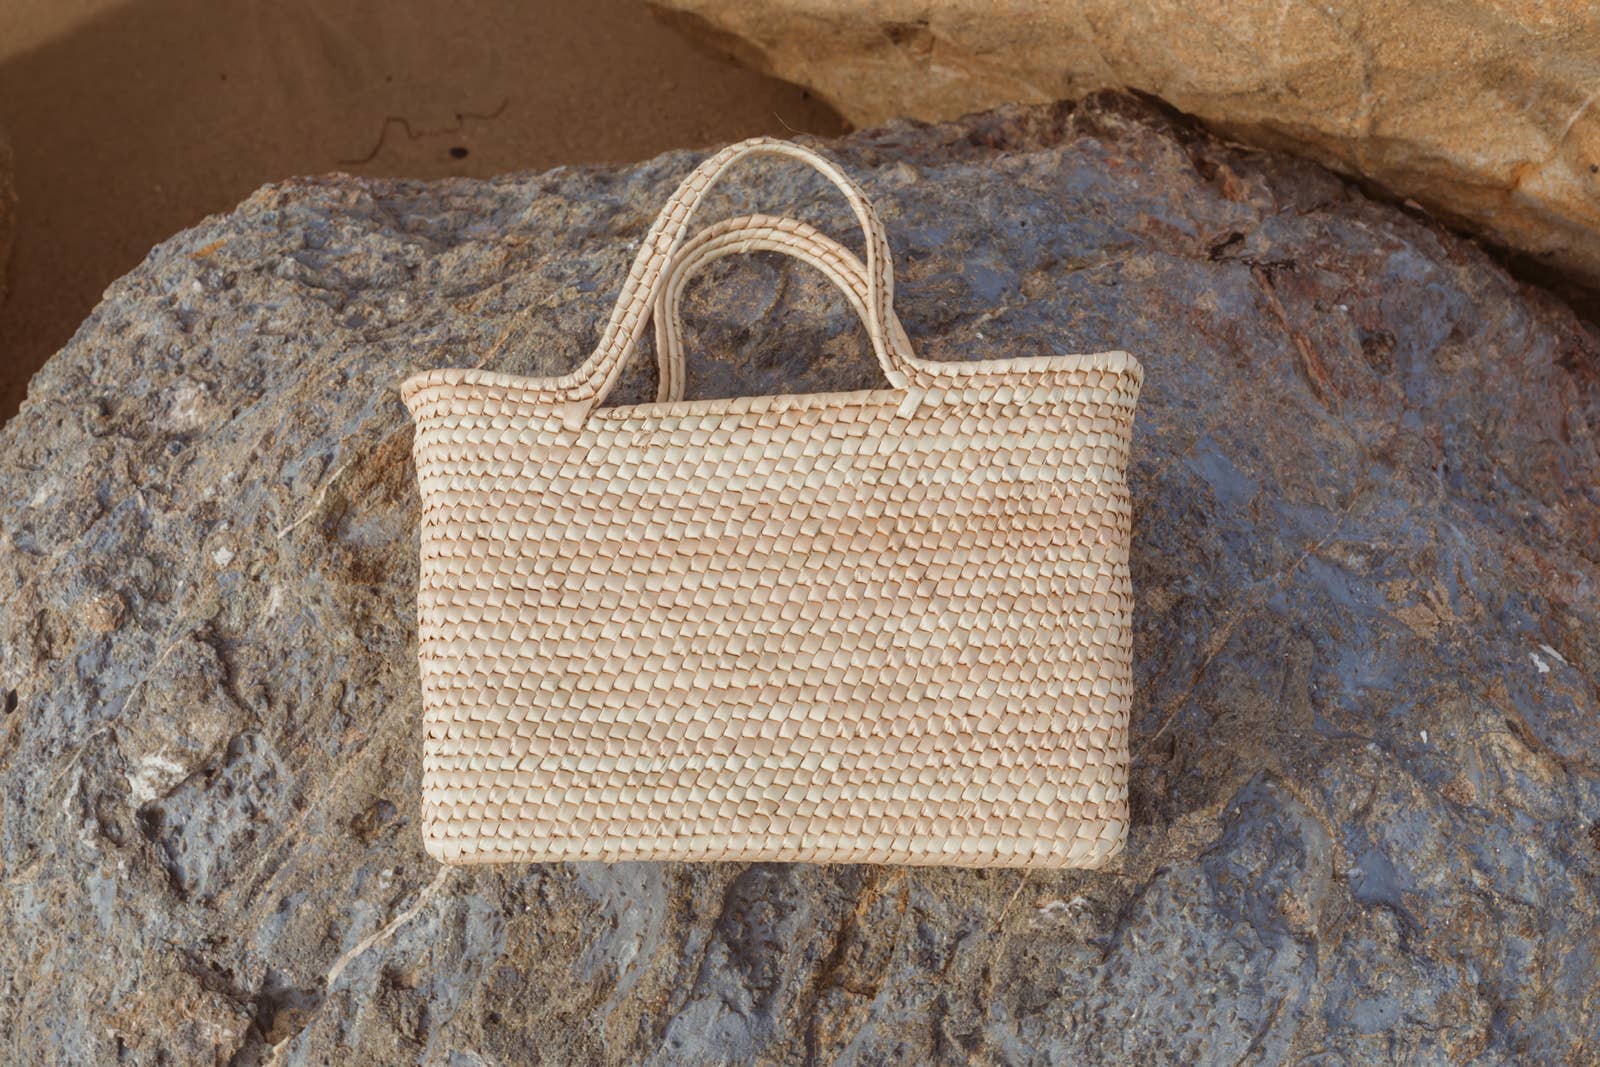 Leah  Handcrafted hats, straw bags, and baskets inspired by coastal  California.